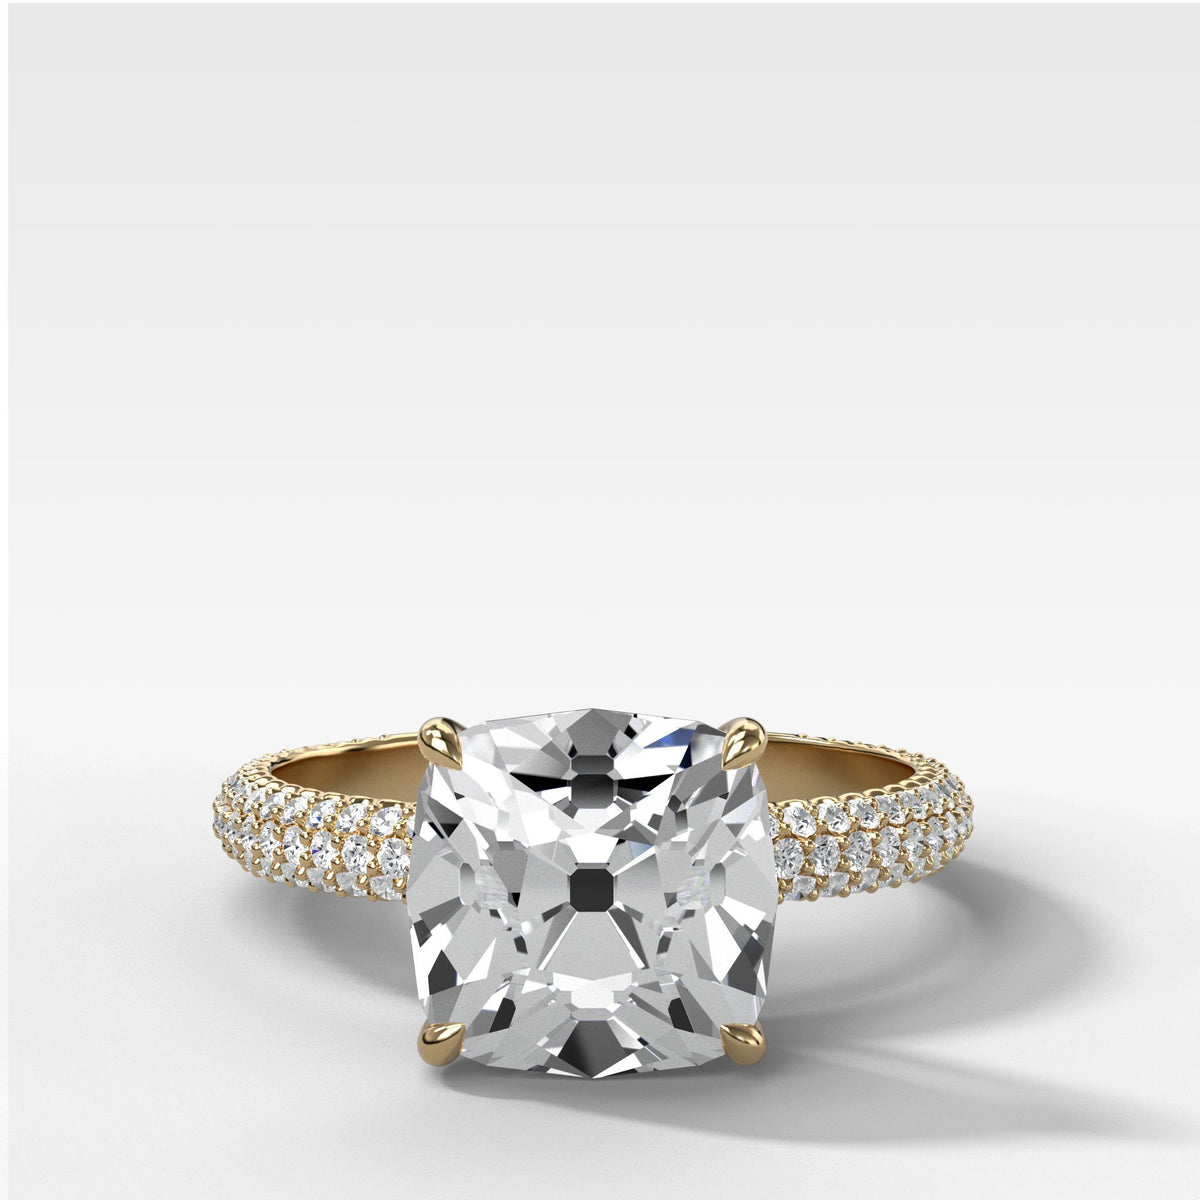 Triple Row Pavé Engagement Ring With Old Mine Cut in Yellow Gold by Good Stone